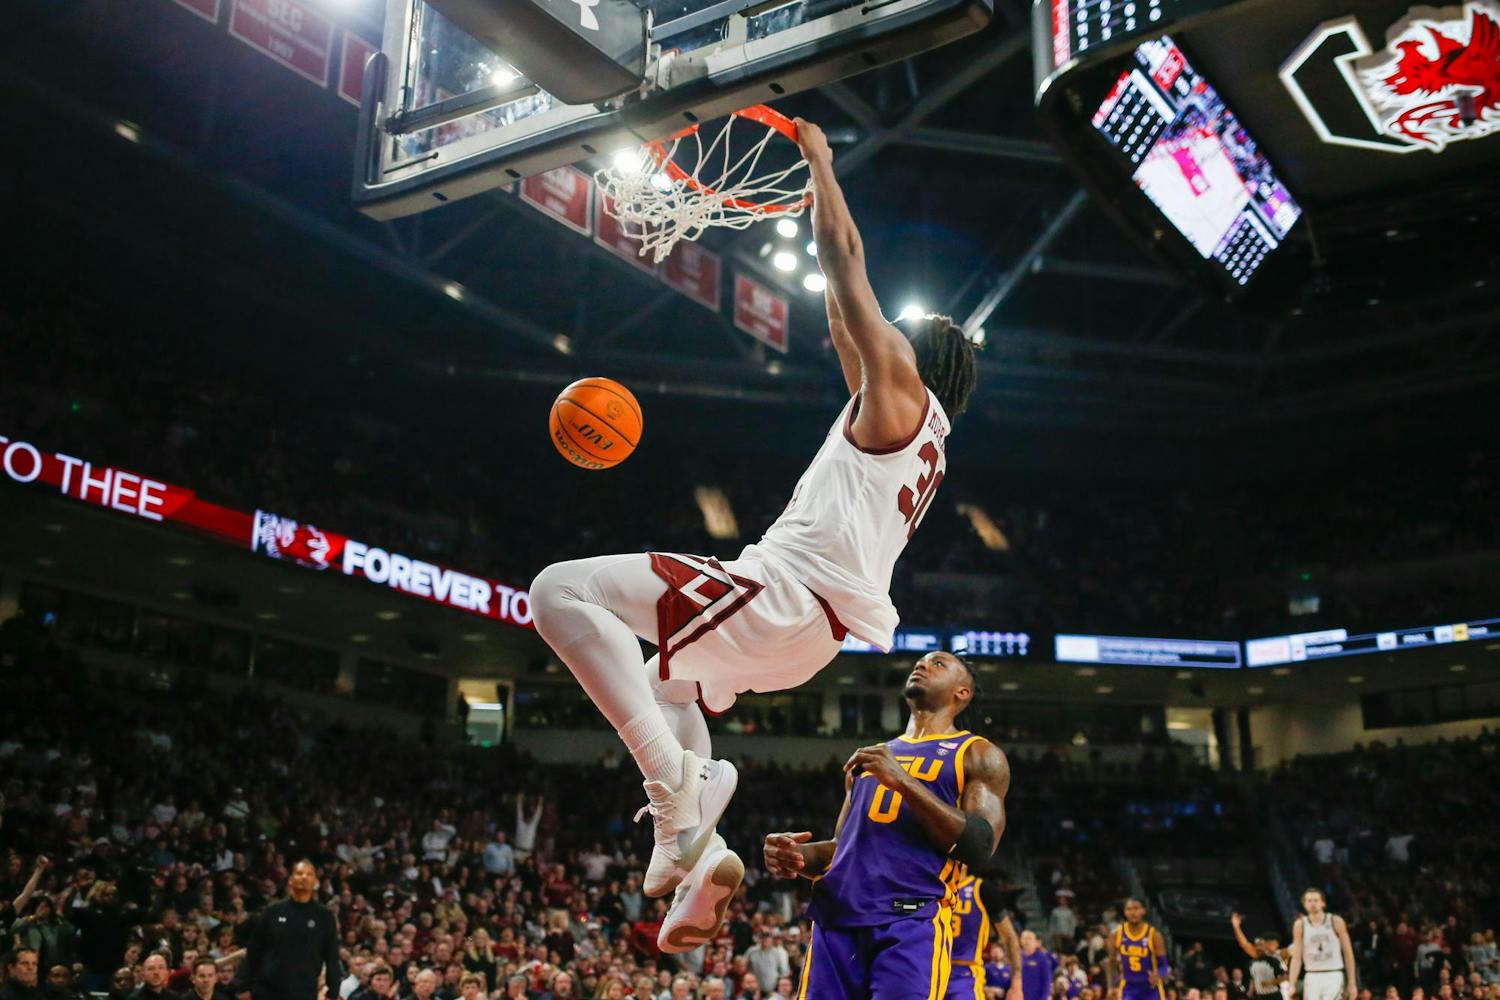 FILE- Freshman forward Collin Murray-Boyles hangs on the rim of the basket during South Carolina’s game against LSU at Colonial Life Arena on Feb. 17, 2024. The ɫɫƵs defeated the Arkansas Razorback 80-66 in the SEC tournament on March 14, 2024, and Murray-Boyles led scoring with 24 points.